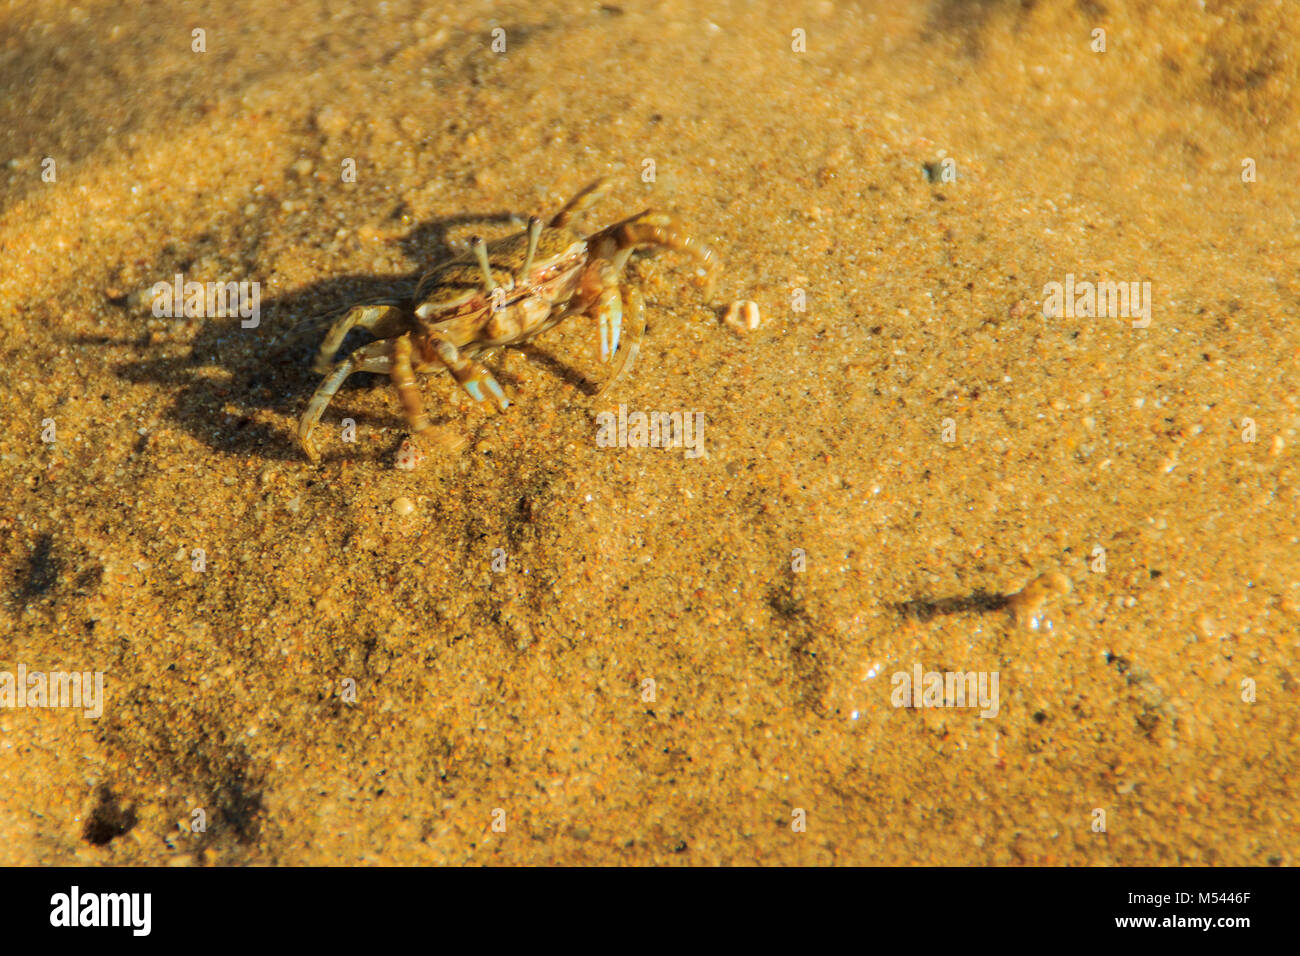 Close up Meder's Mangrove Crab, or Salt March Crab (Sesarma mederi) on the beach when the sea water receded. Stock Photo